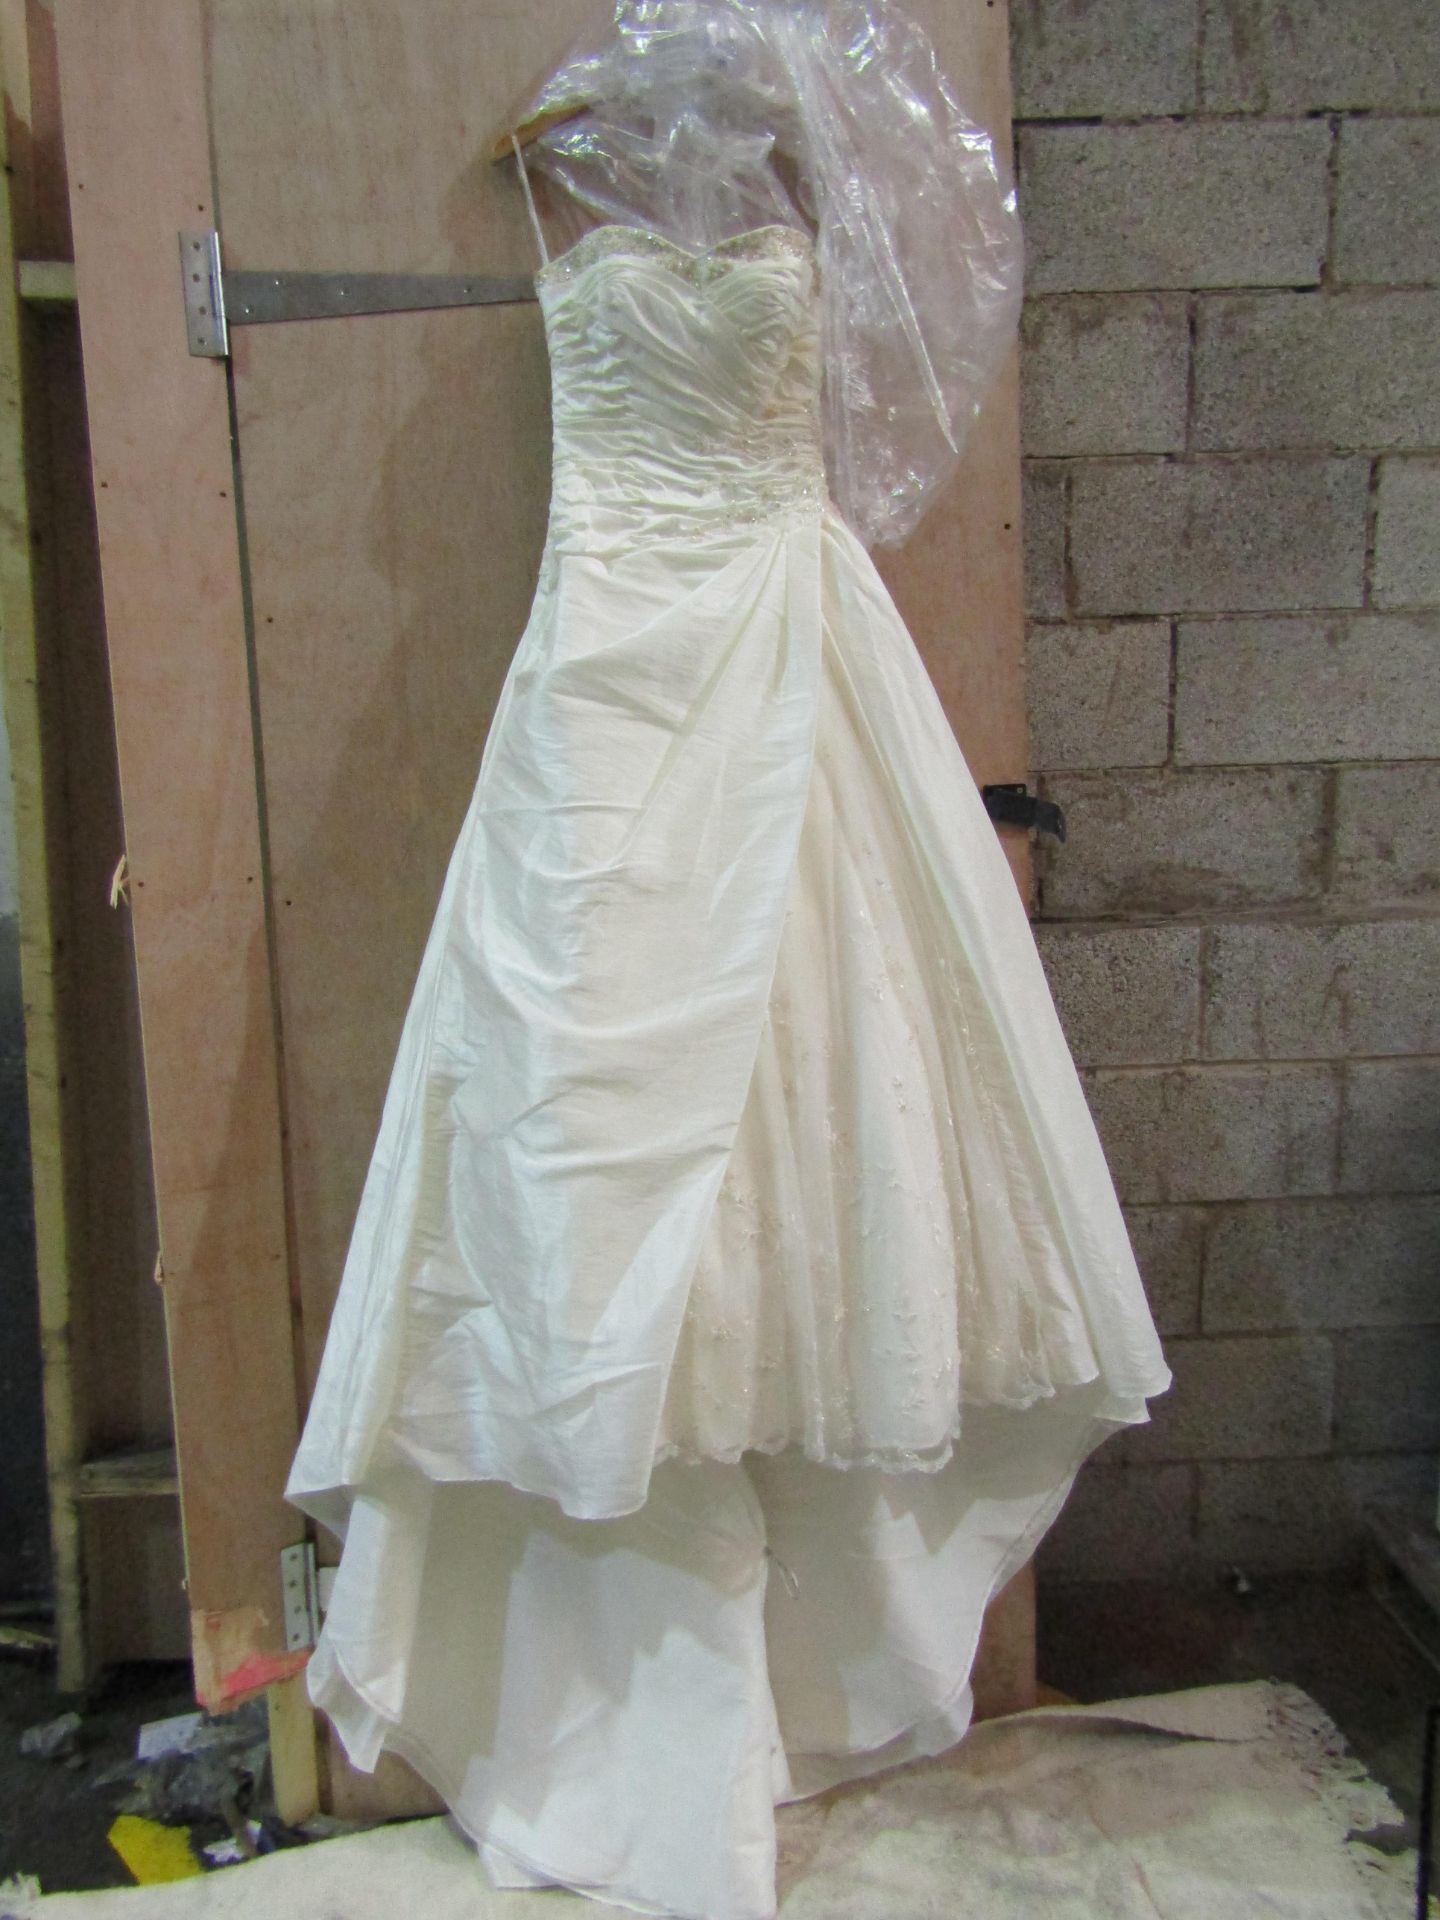 Approx 500 pieces of wedding shop stock to include wedding dresses, mother of the bride, dresses, - Image 92 of 108